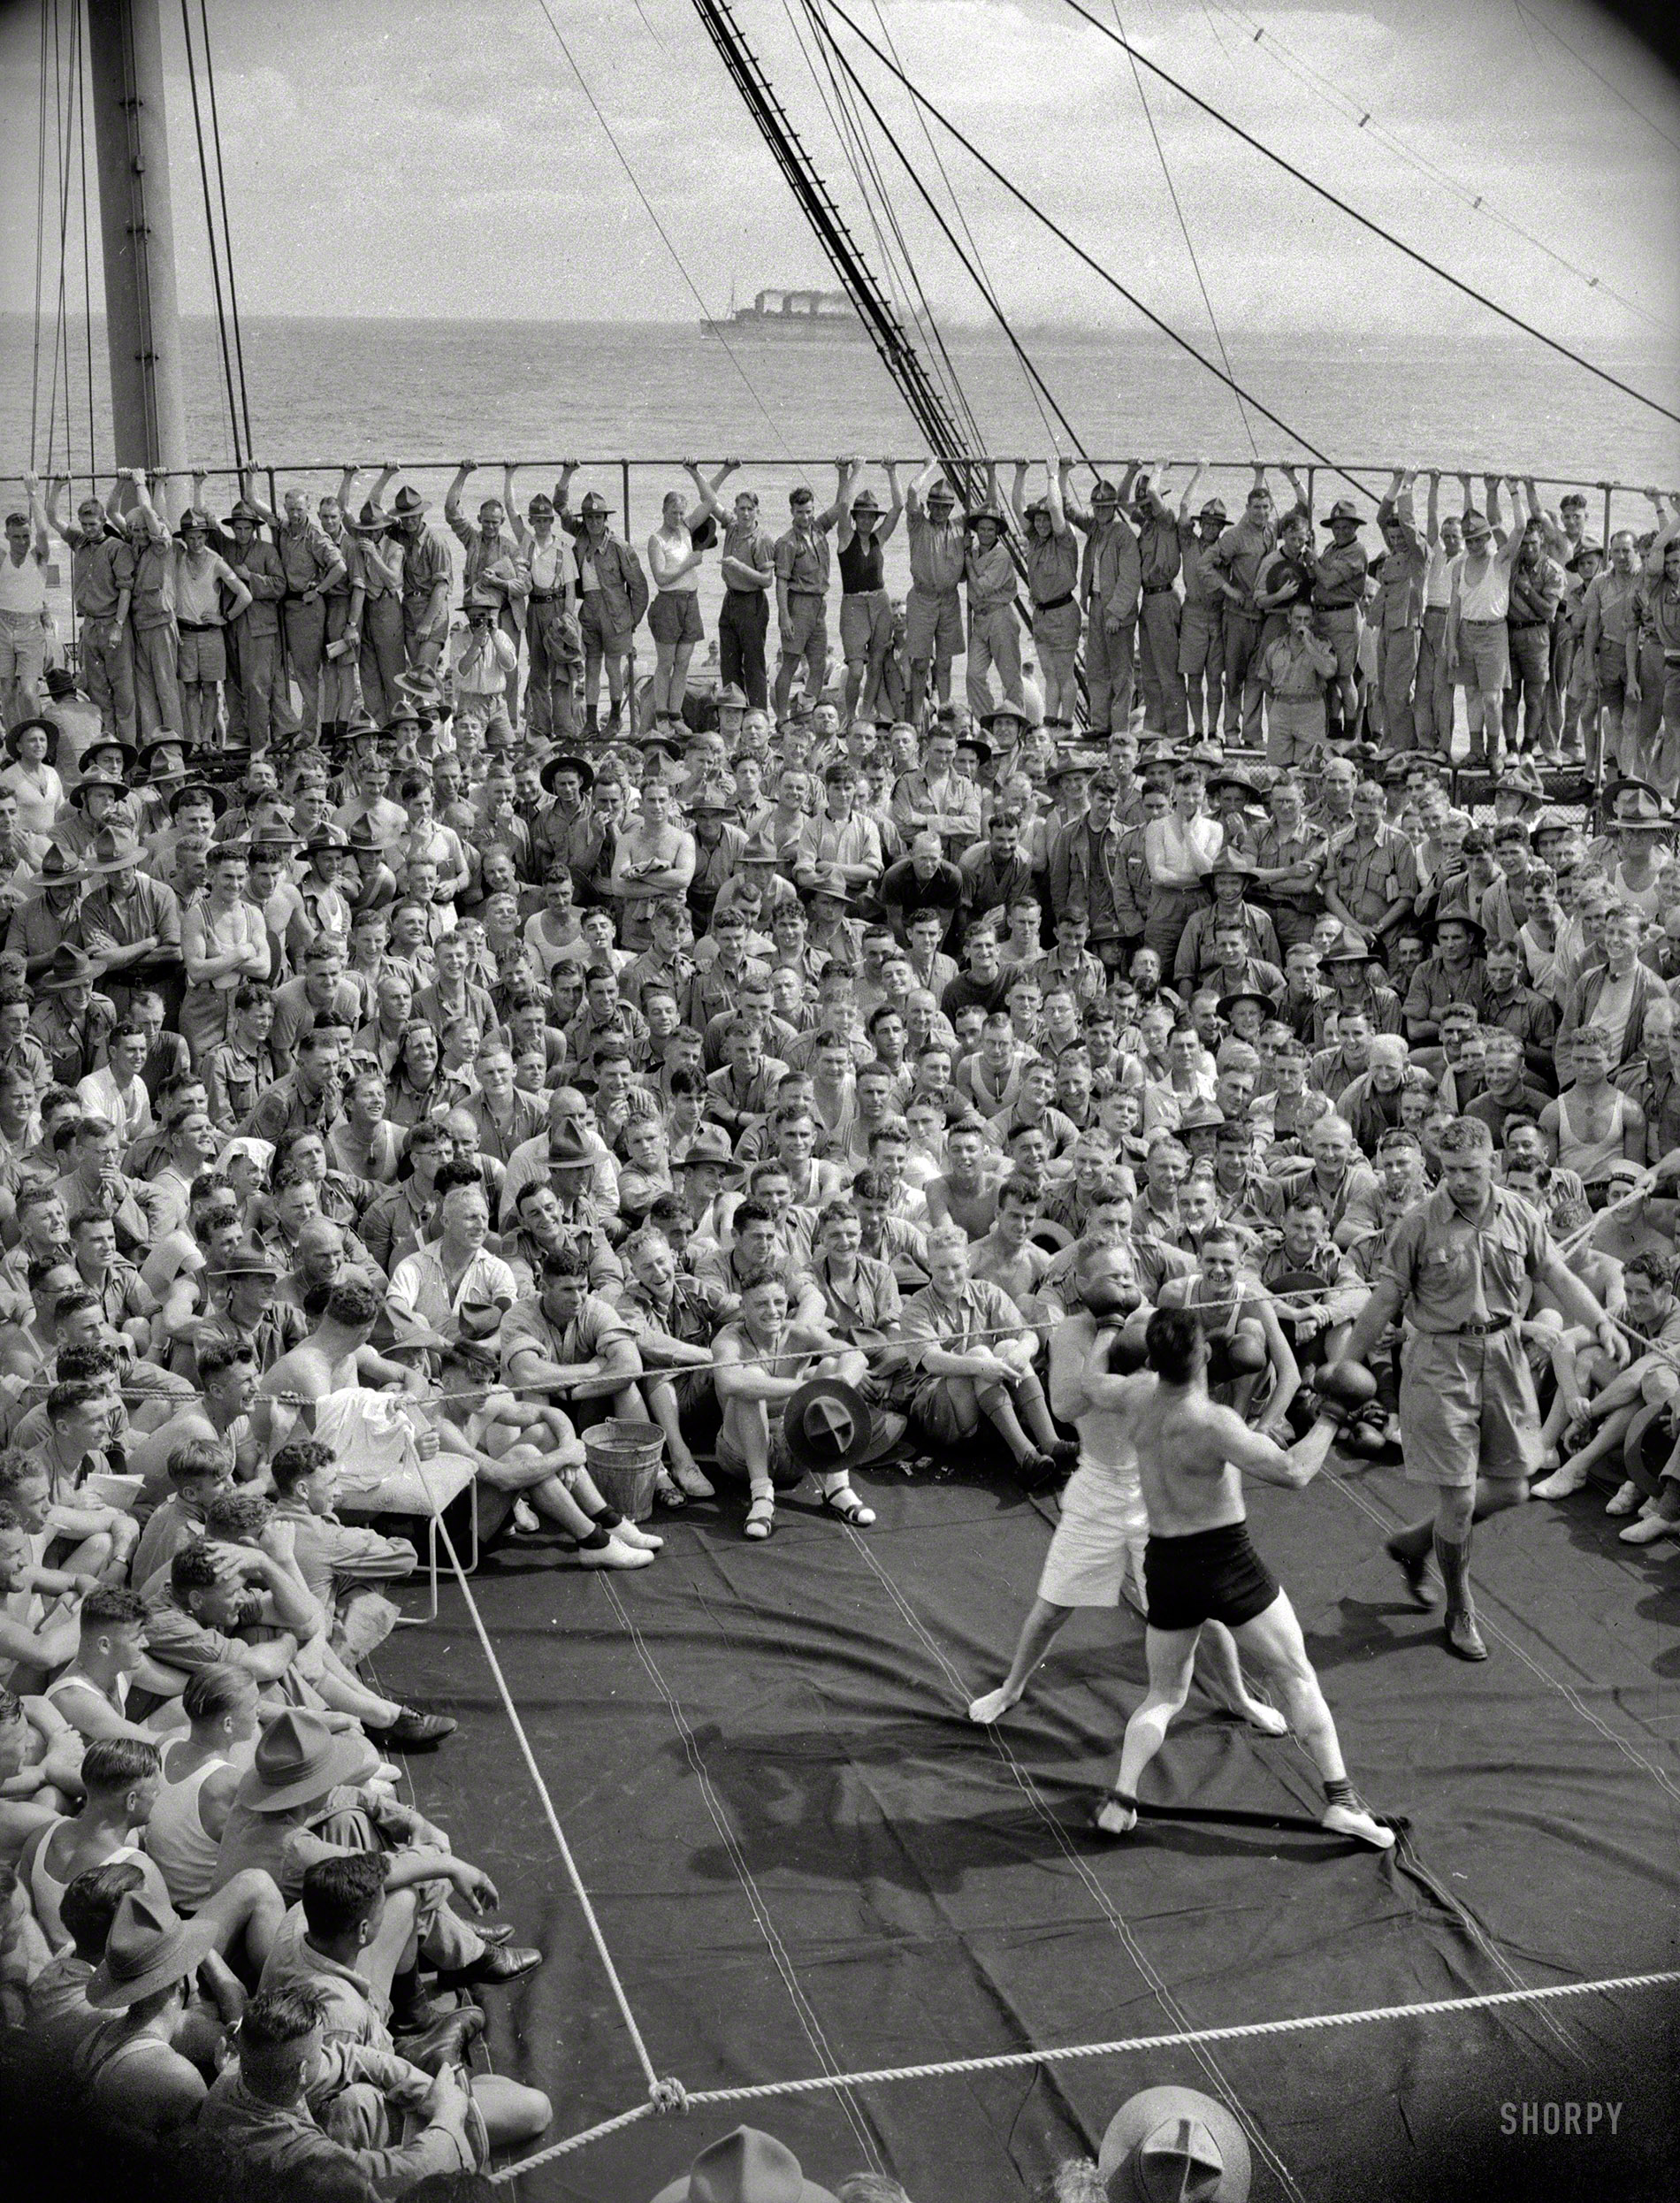 Circa 1940, somewhere on the high seas. "Boxing match in progress on the deck of New Zealand troopship Dominion Monarch, carrying 2nd Echelon 4th Reinforcements to the United Kingdom. Probably Empress of Russia seen sailing in the background." View full size.